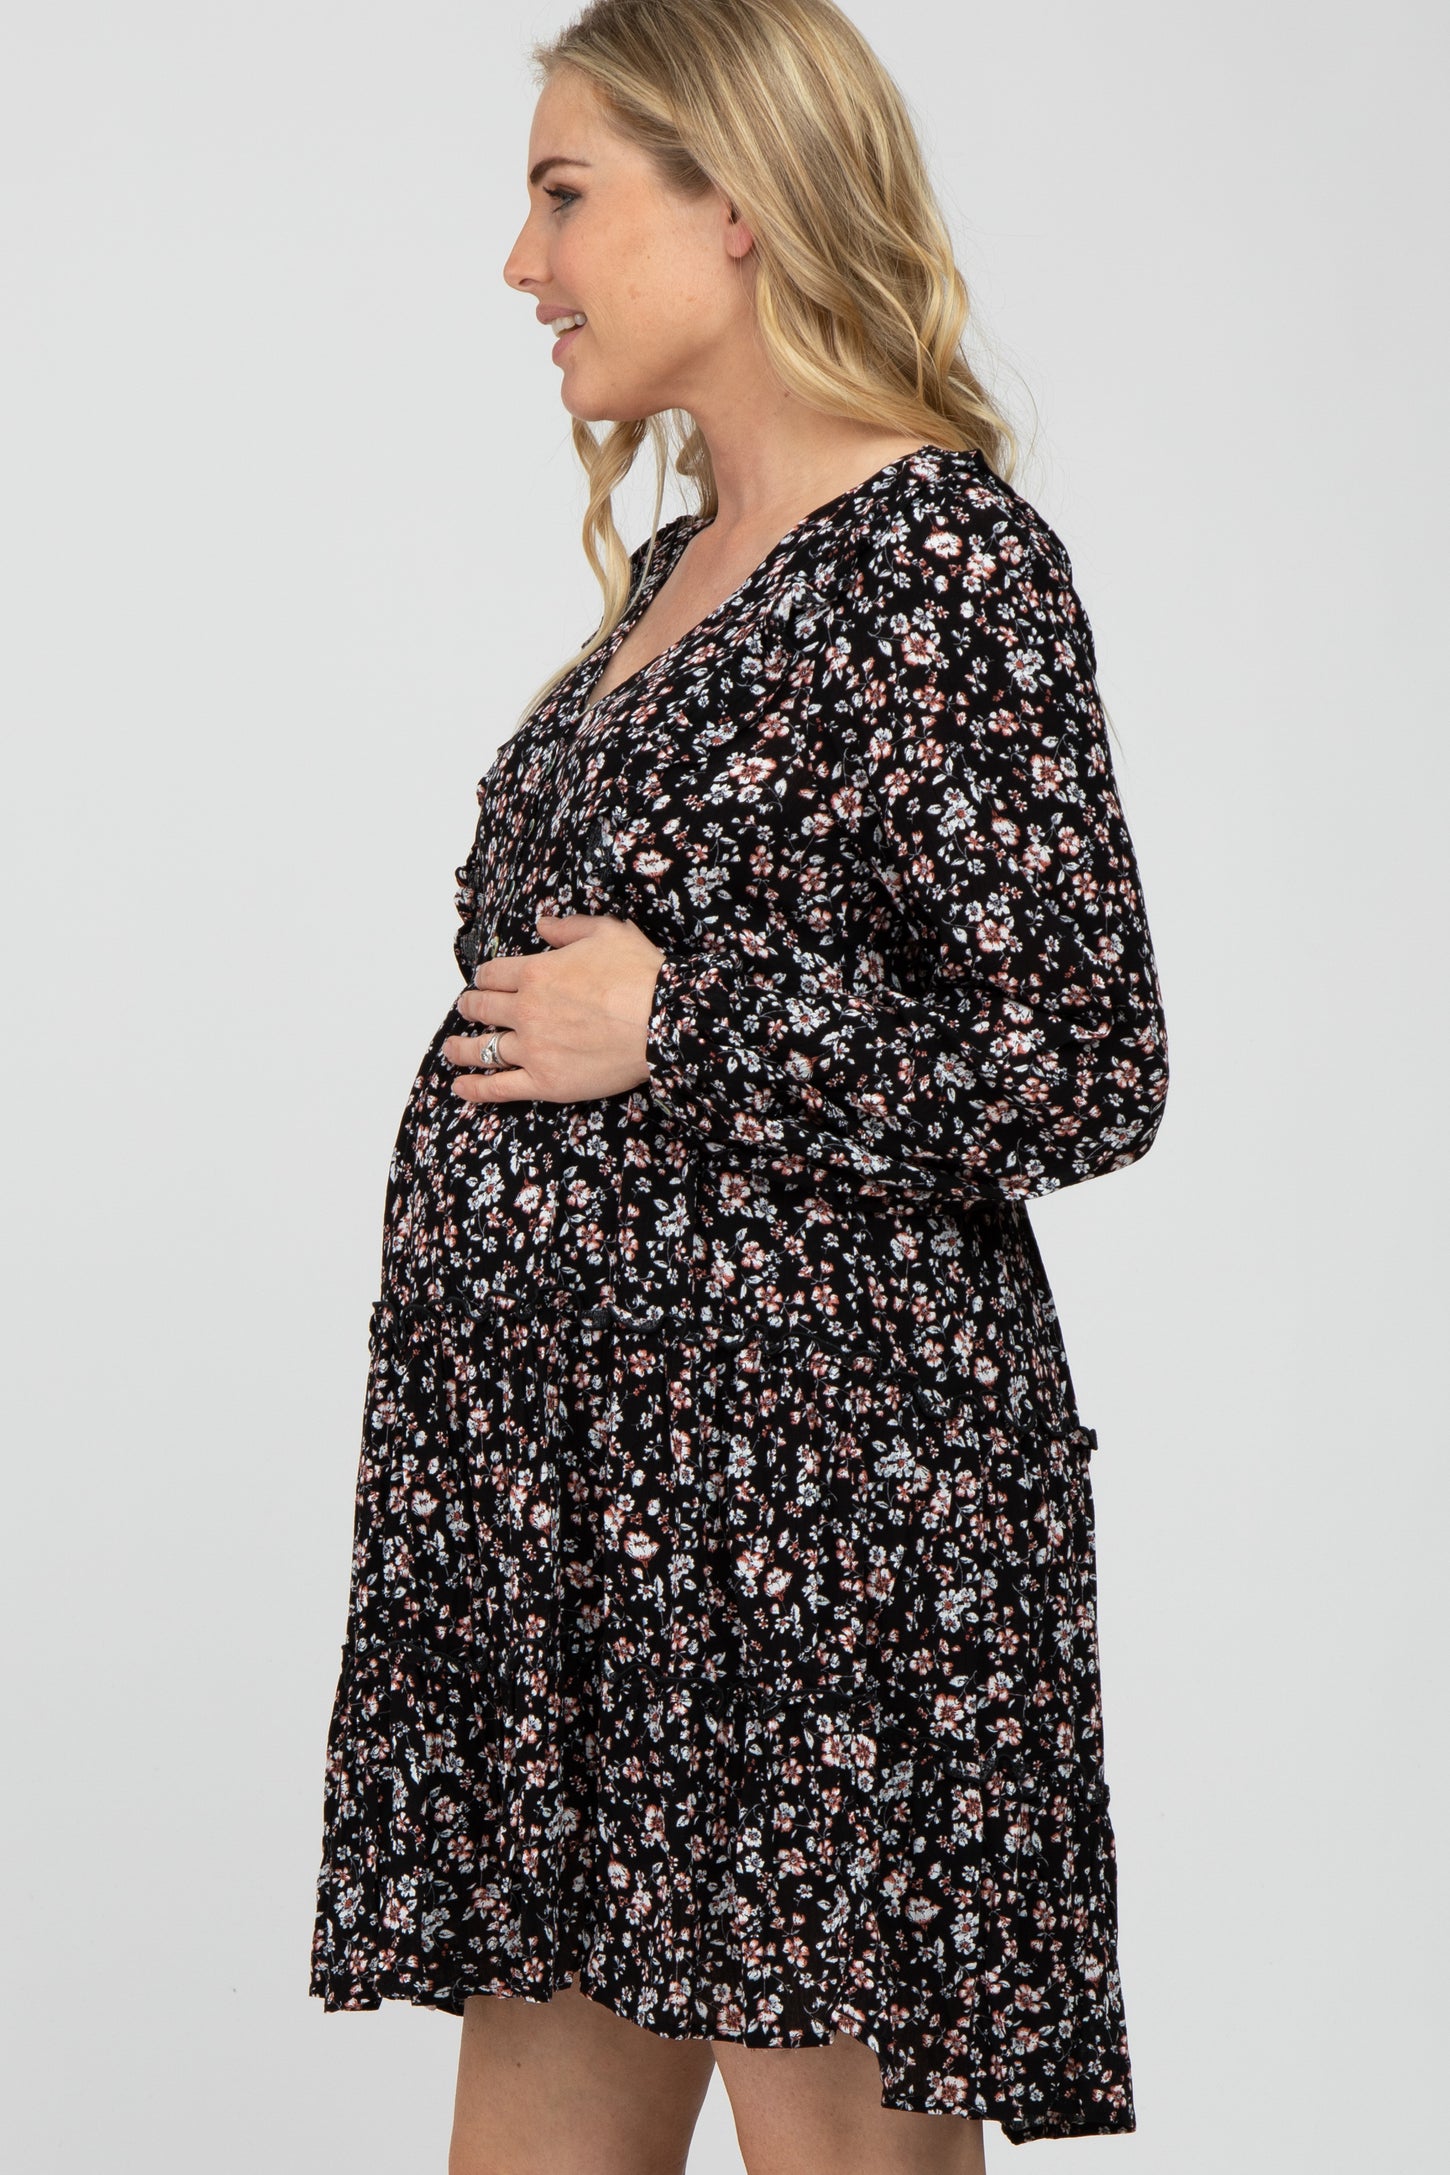 Black Floral Ruffle Tiered Maternity Dress